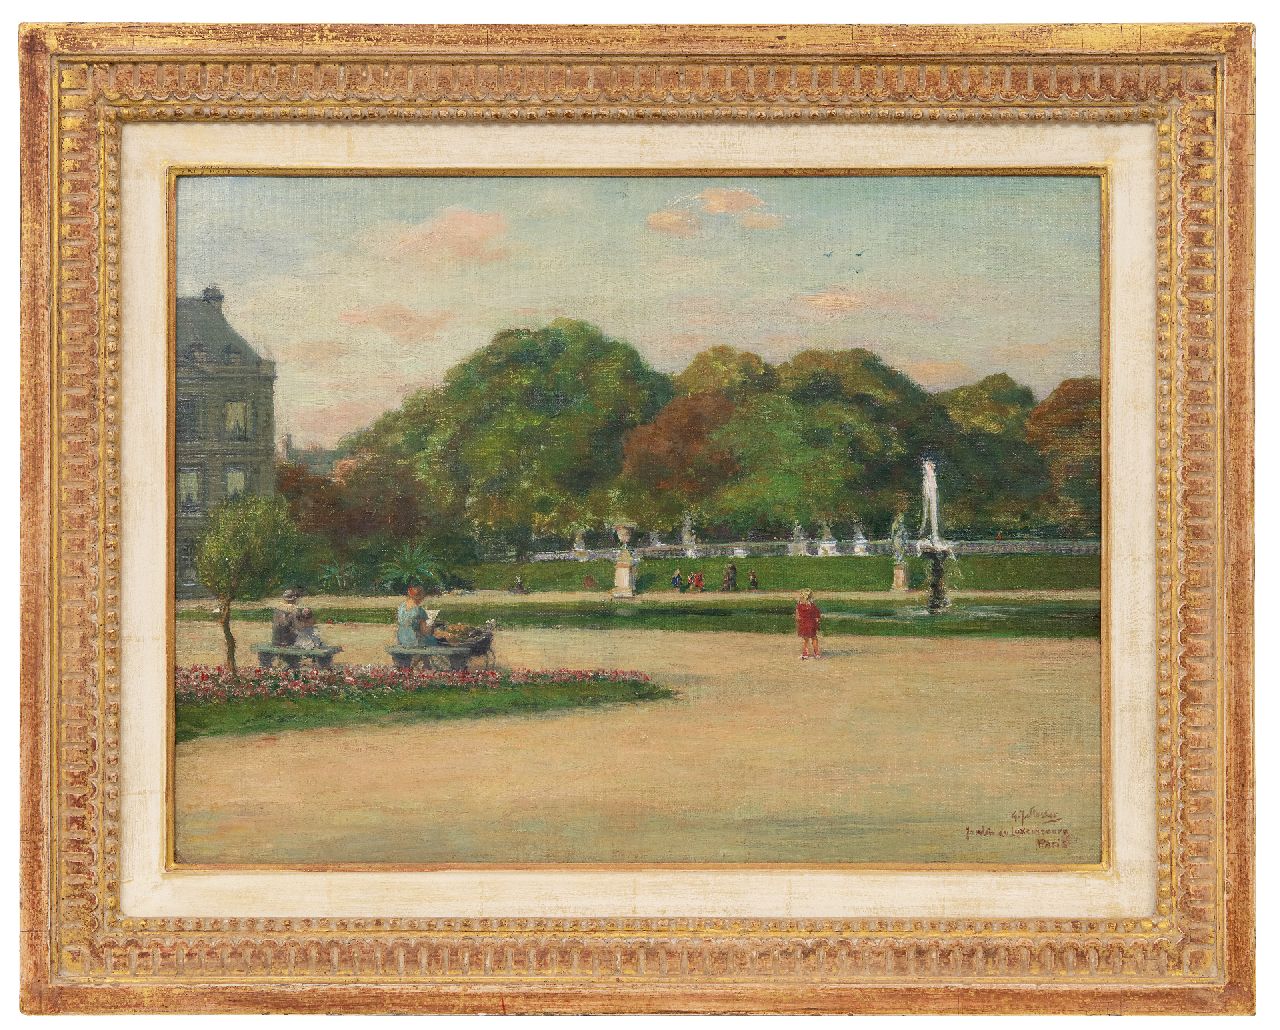 Staller G.J.  | Gerard Johan Staller | Paintings offered for sale | Jardin du Luxembourg, Paris, oil on canvas laid down on panel 35.8 x 48.2 cm, signed l.r.